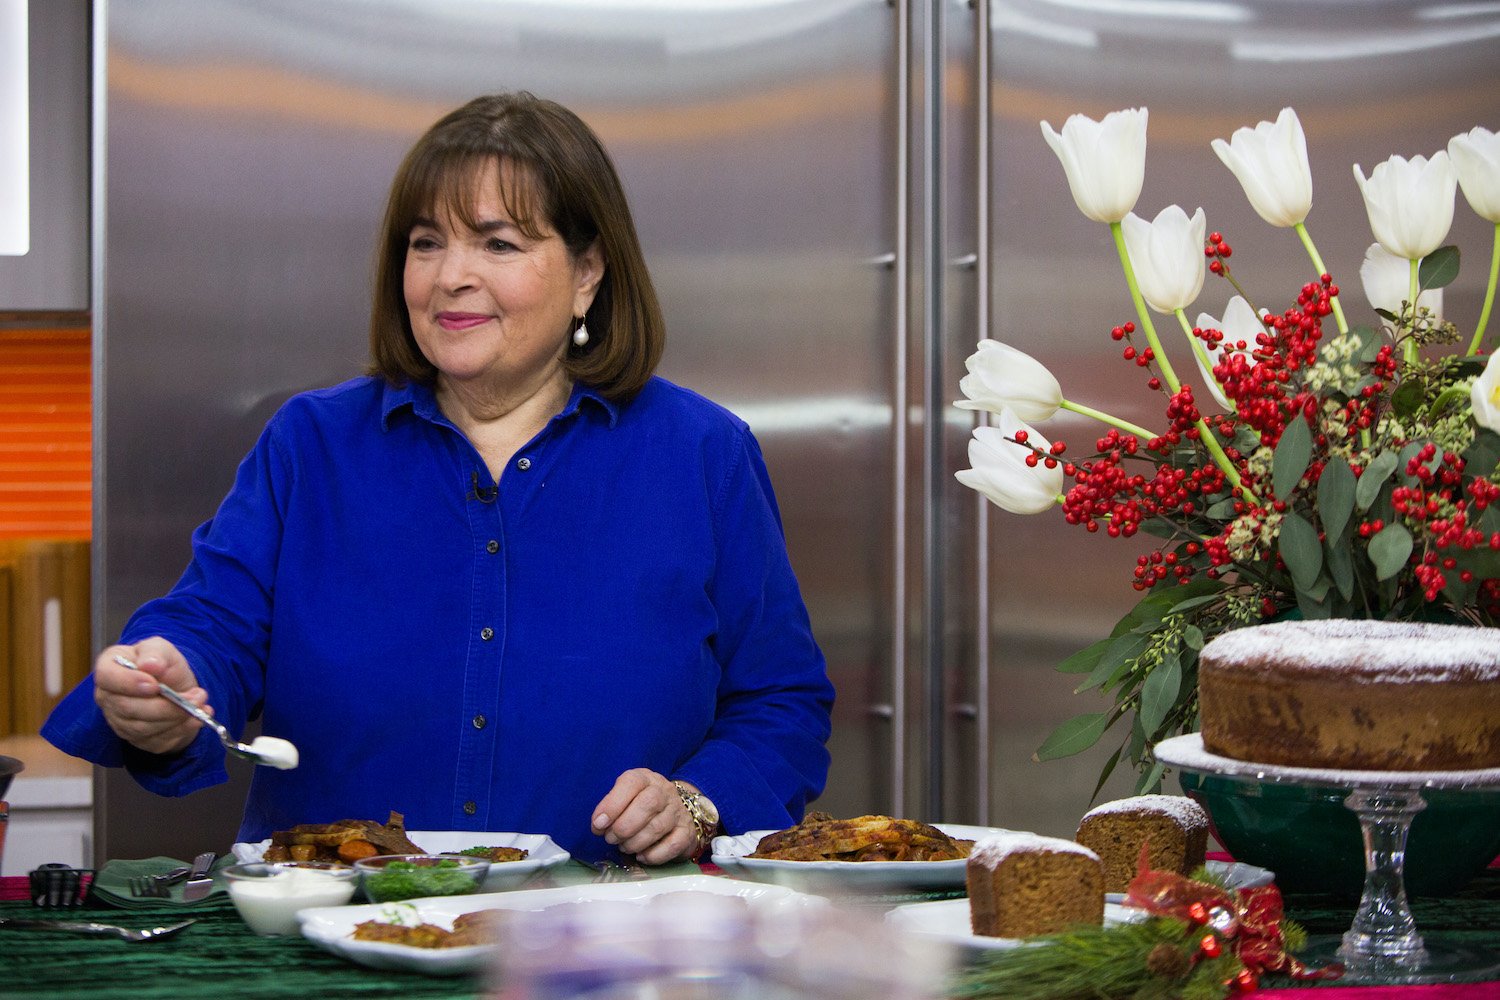 'Barefoot Contessa' host Ina Garten plates food on the Today show in 2017